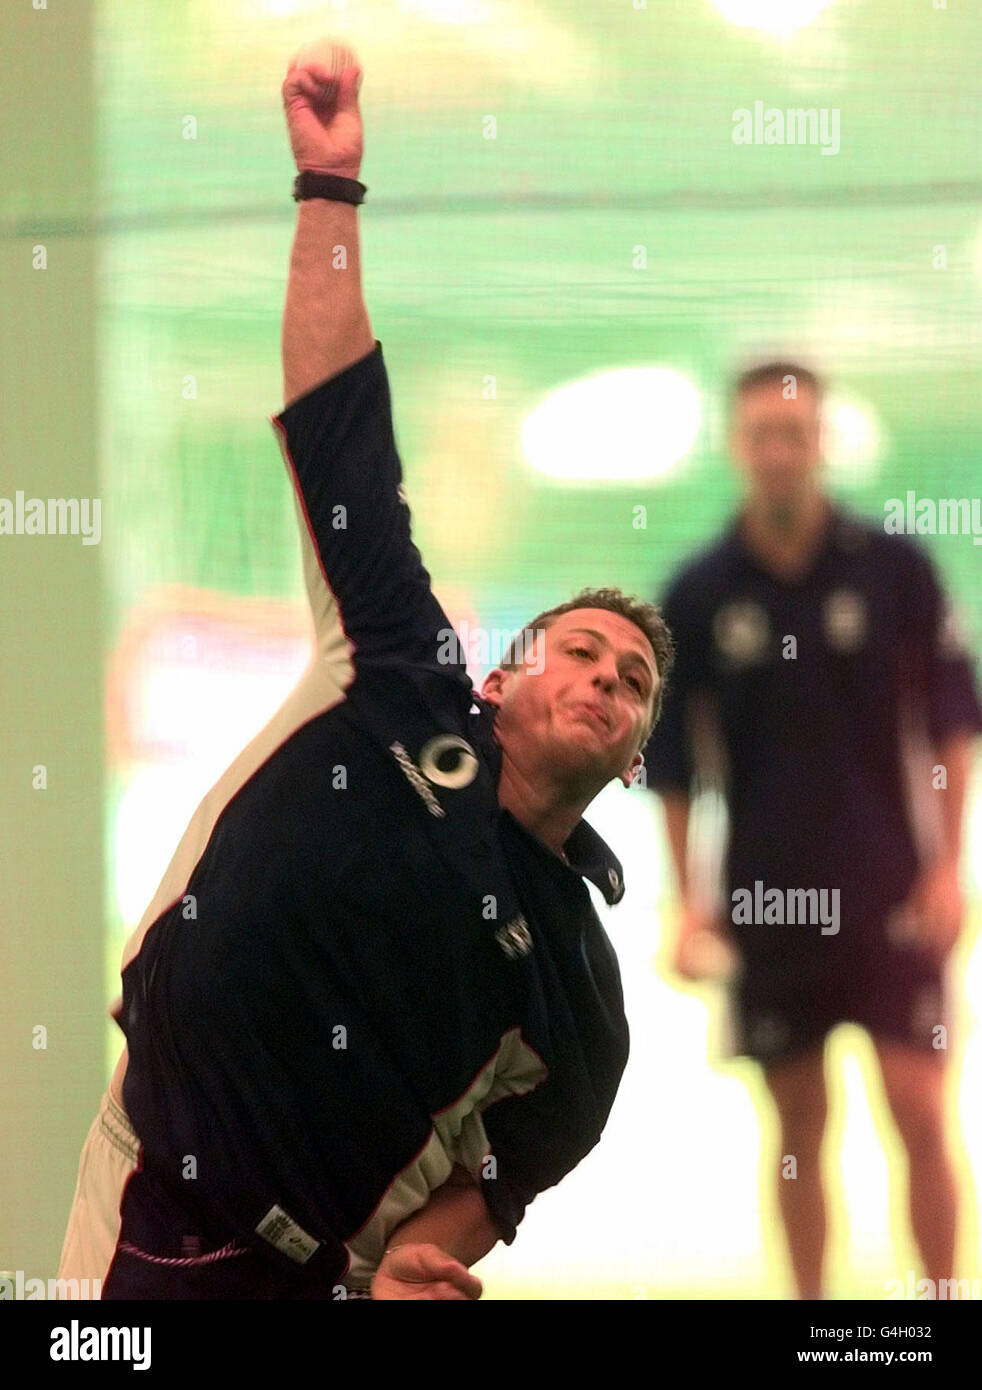 England's Darren Gough practices his bowling in the indoor nets at the Sydney Cricket Ground the day before the first one-day international triangular series final against Australia. The match is in doubt following three days of heavy rain in Sydney. Stock Photo